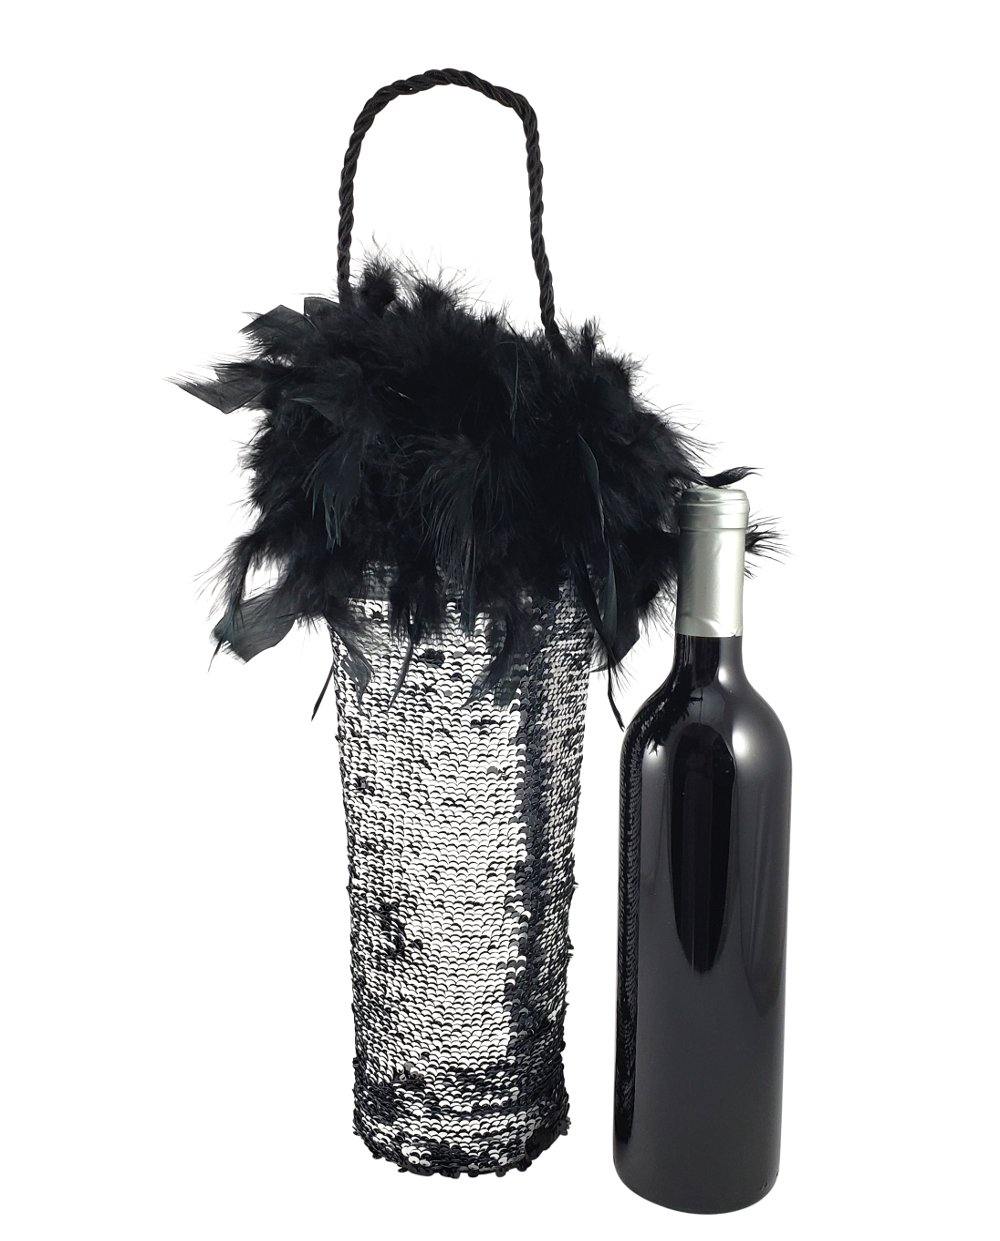 Silver Insulated Wine Bag by Tipsy Totes